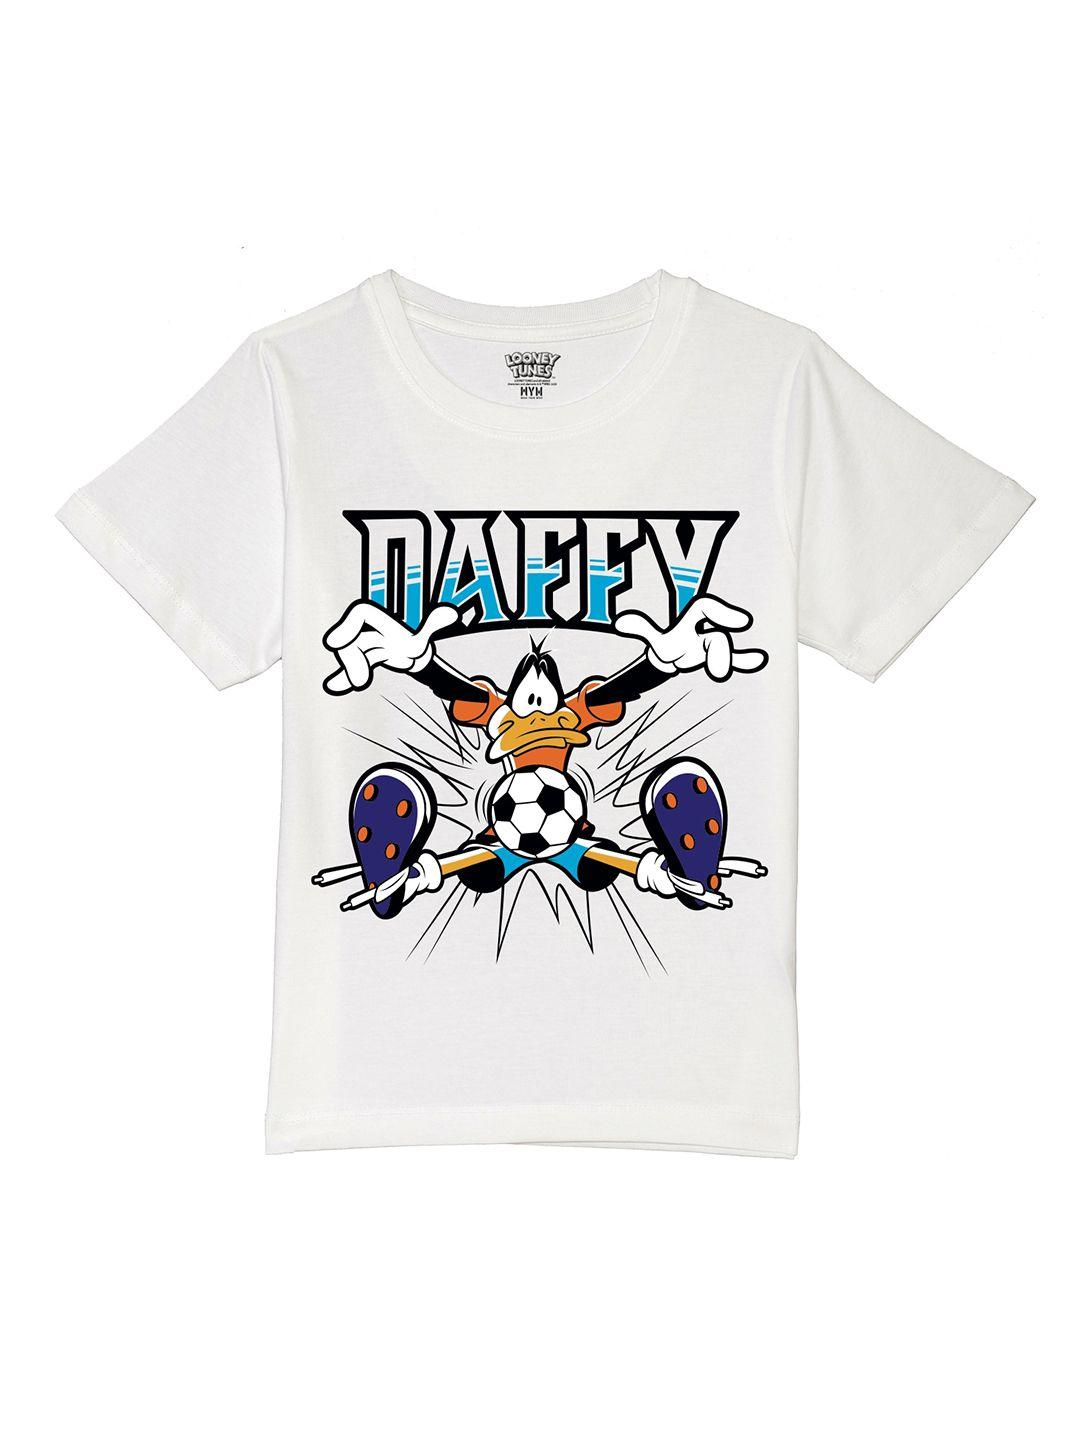 wear-your-mind-boys-looney-tunes-printed-pure-cotton-t-shirt